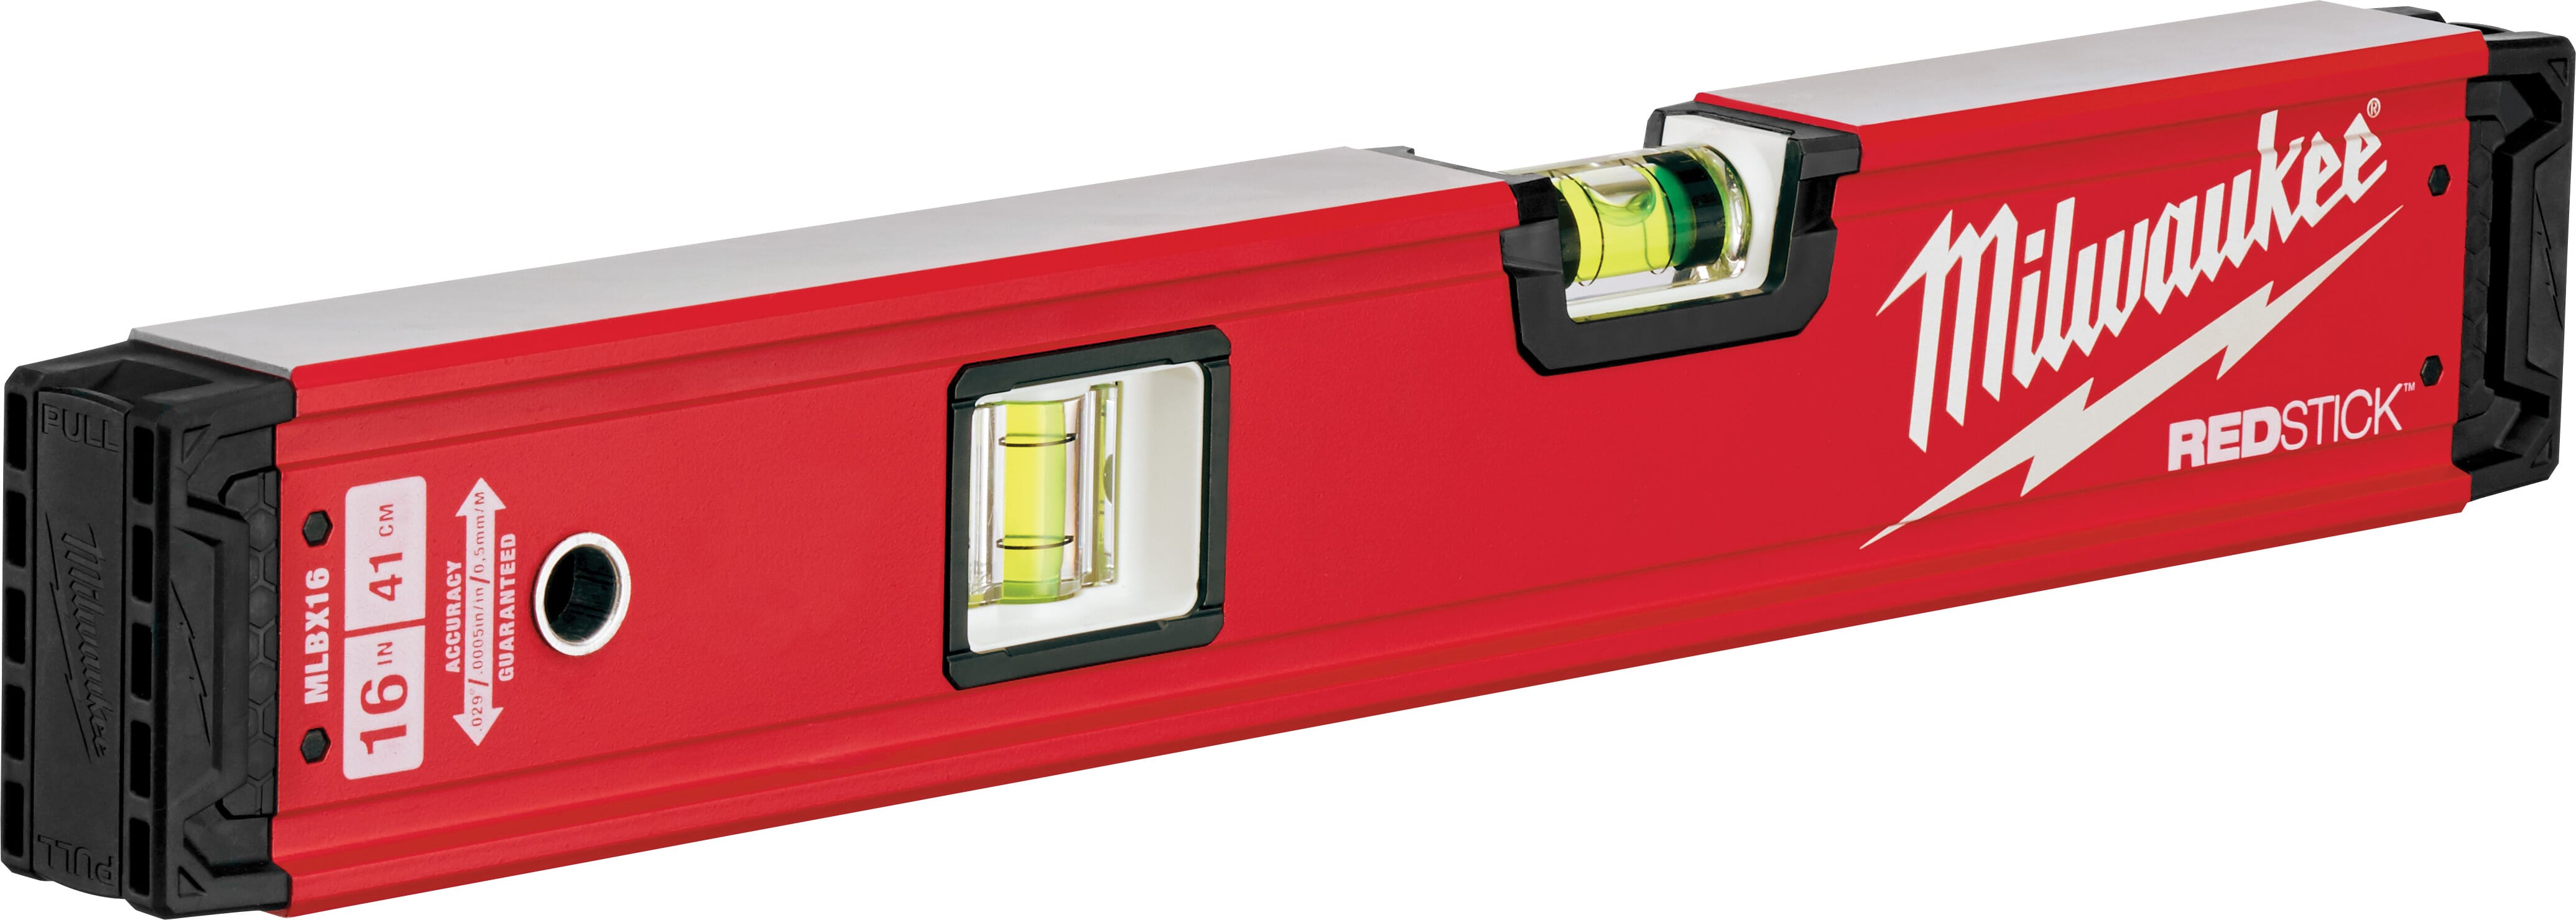 Milwaukee® REDSTICK™ MLBX16 Box Level, 16 in L, 2 Vials, Aluminum, (2) Level/(3) Plumb Vial Position, 0.0005 in/in Accuracy